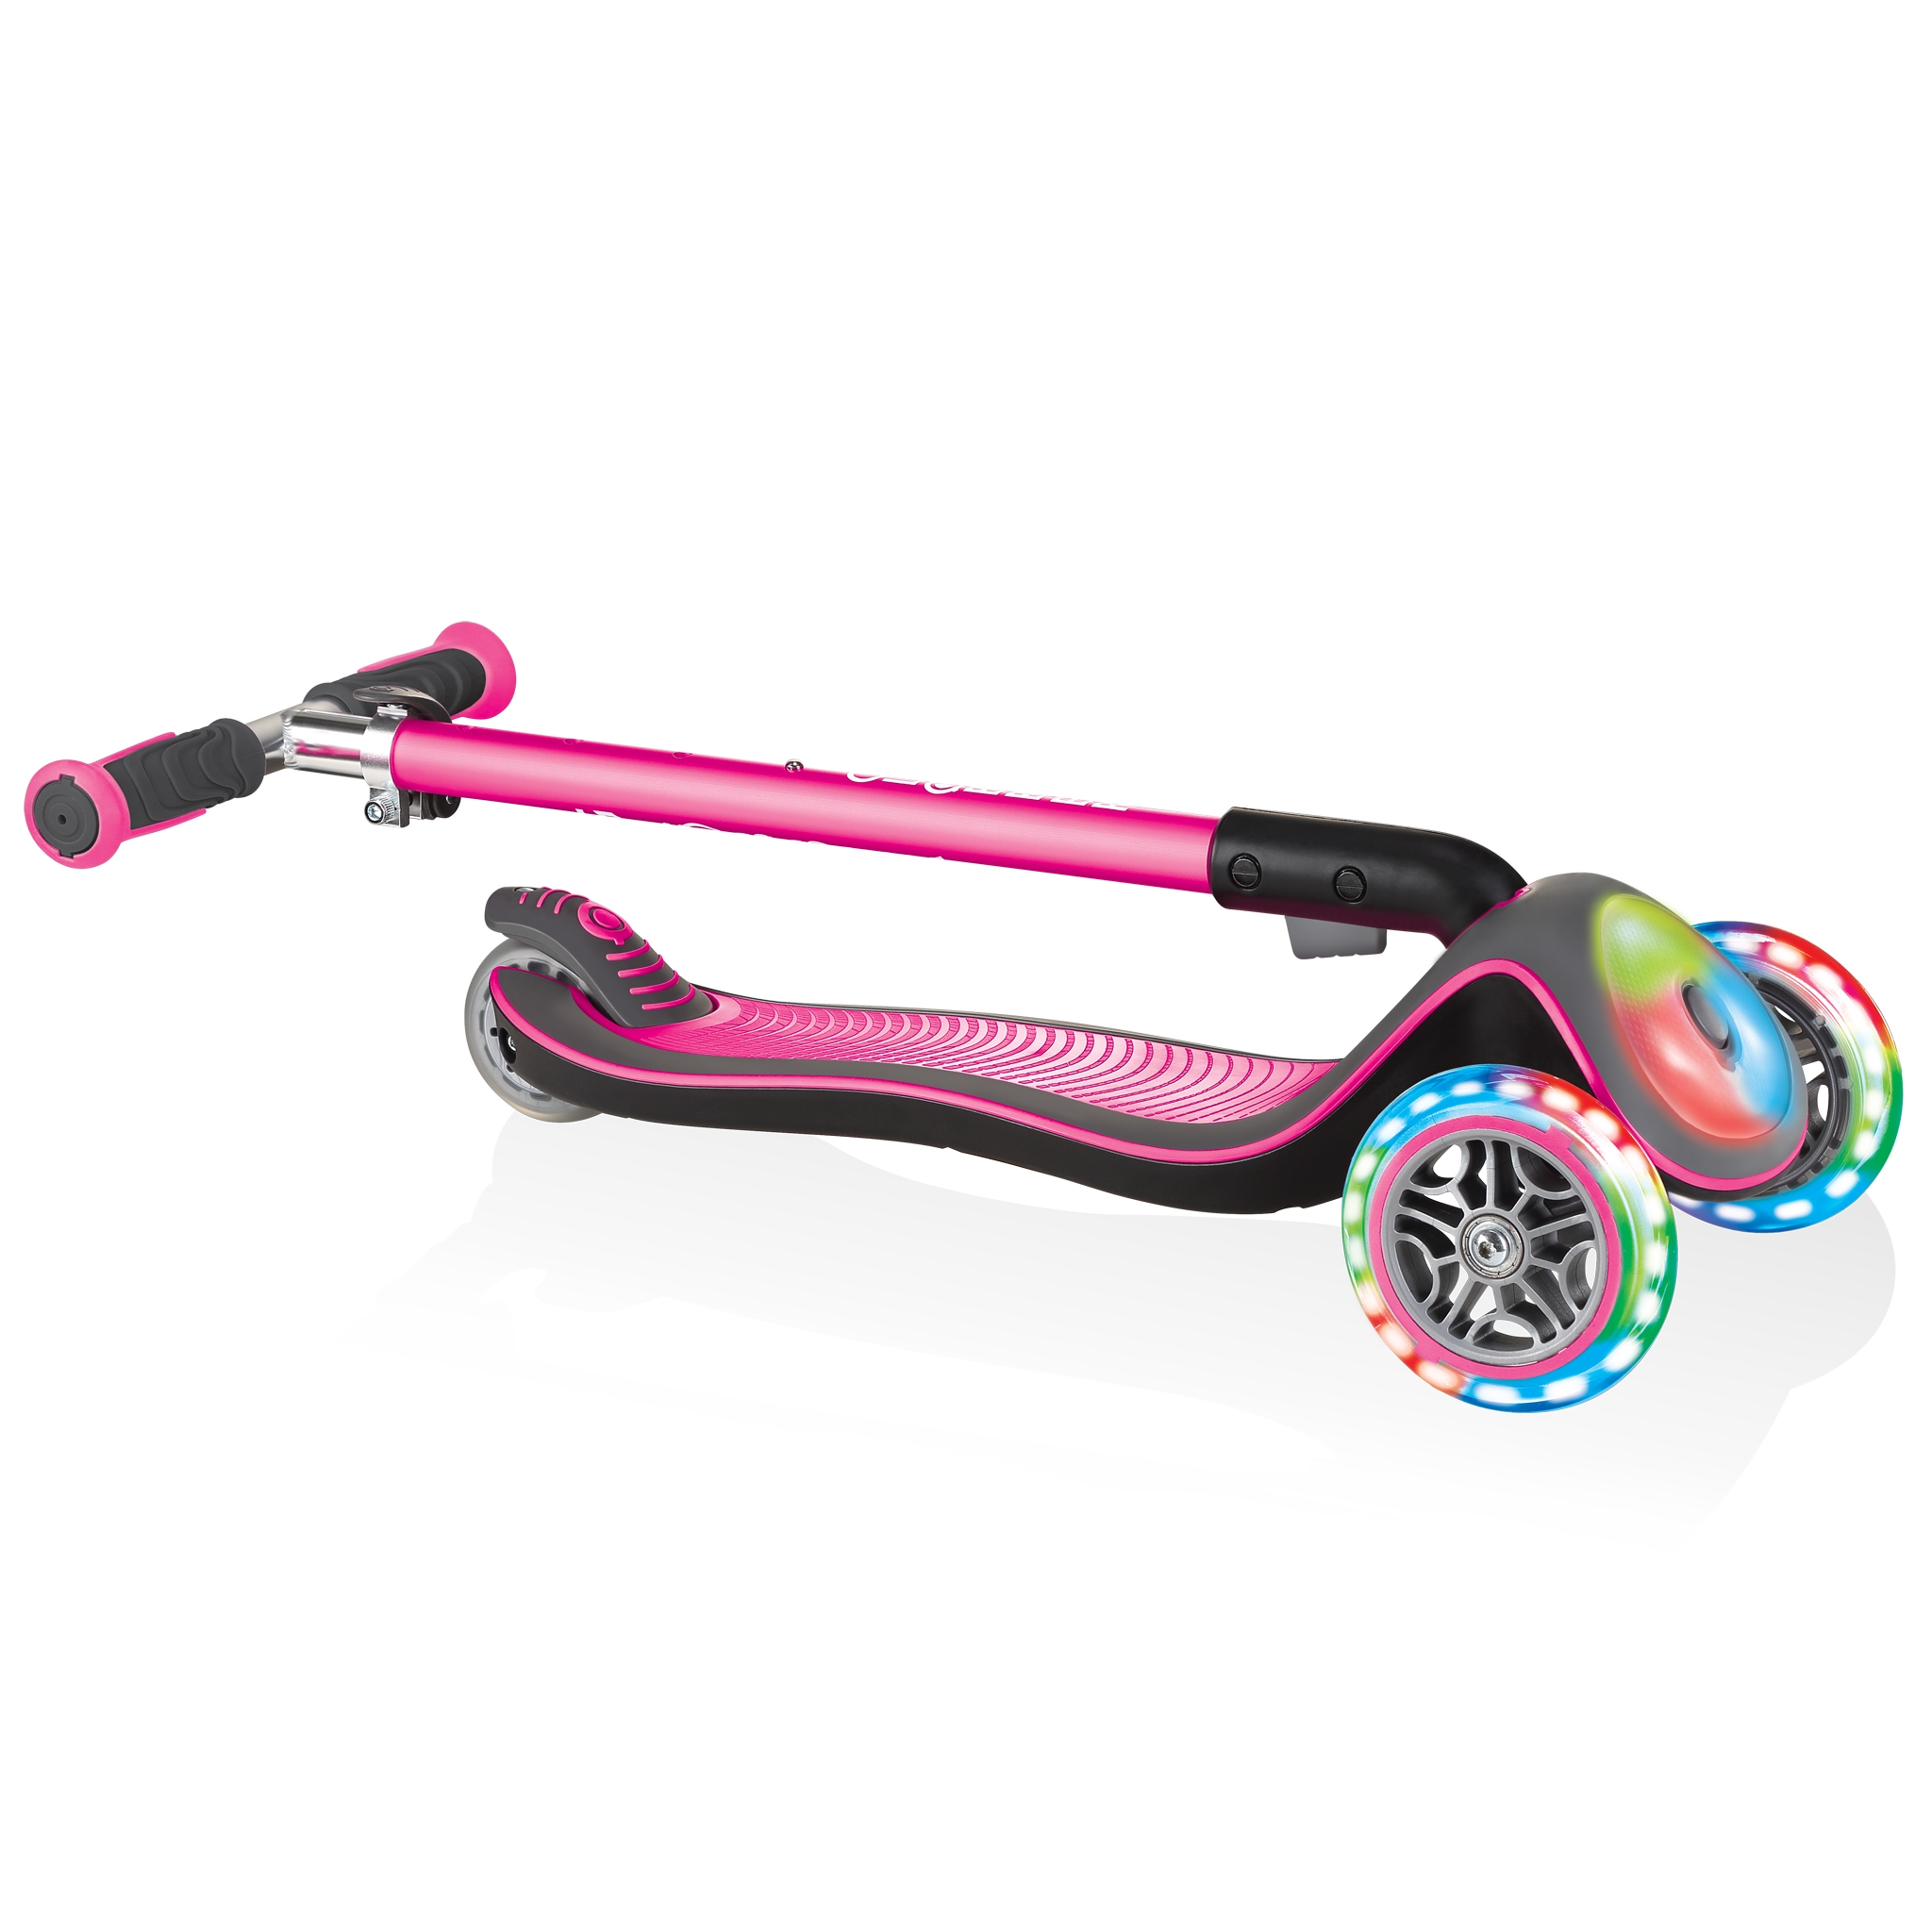 Globber-ELITE-DELUXE-FLASH-LIGHTS-3-wheel-foldable-scooter-for-kids-with-light-up-deck-module-and-wheels-deep-pink 4